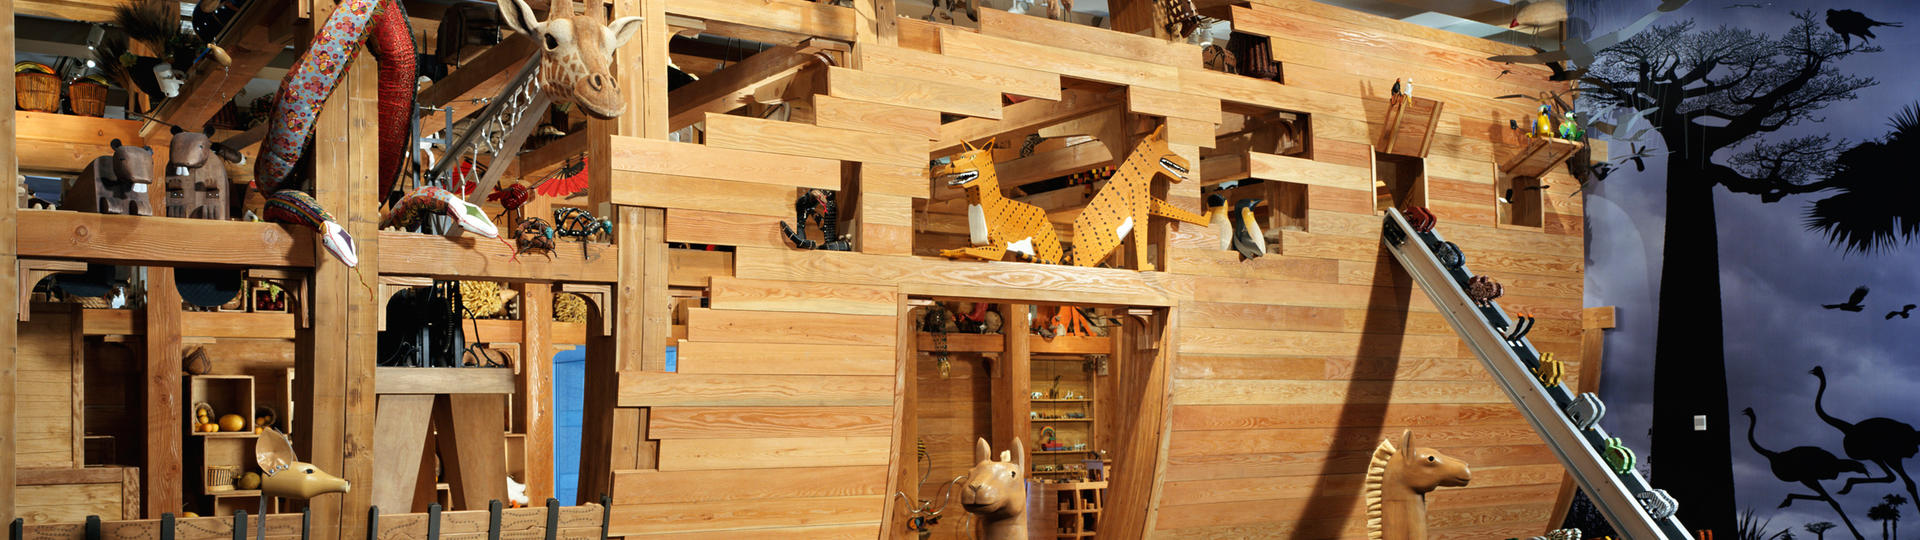 View of Noah&#039;s Ark with animals sticking their heads out from the ark and other animals going up a conveyor belt to the ark